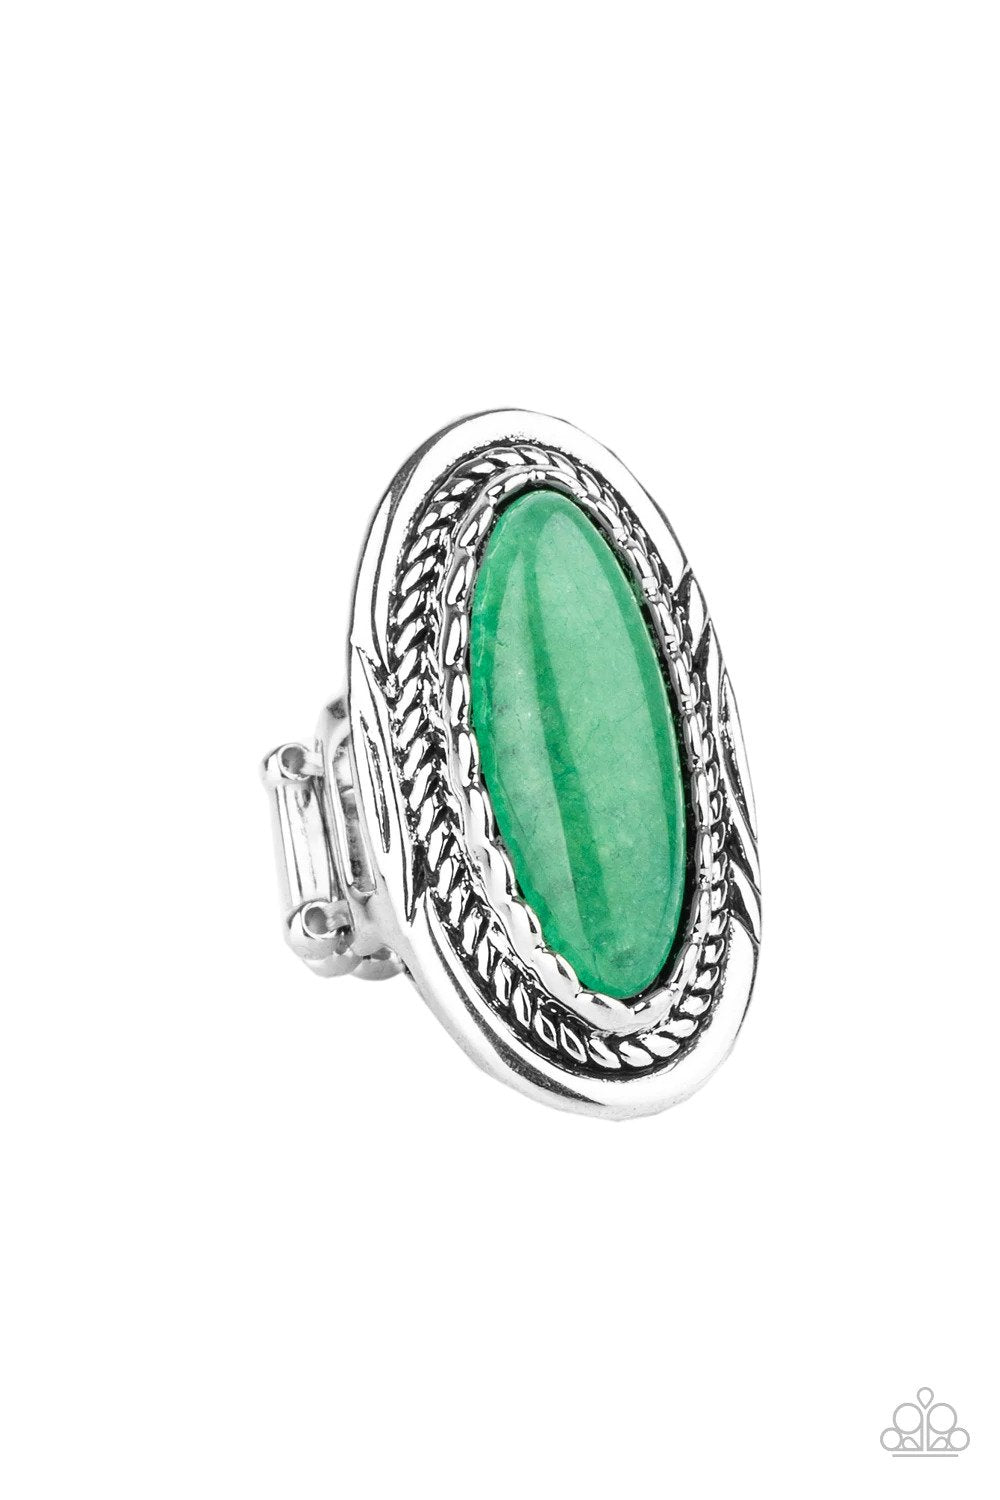 Primal Instincts Green Ring - Paparazzi Accessories- lightbox - CarasShop.com - $5 Jewelry by Cara Jewels